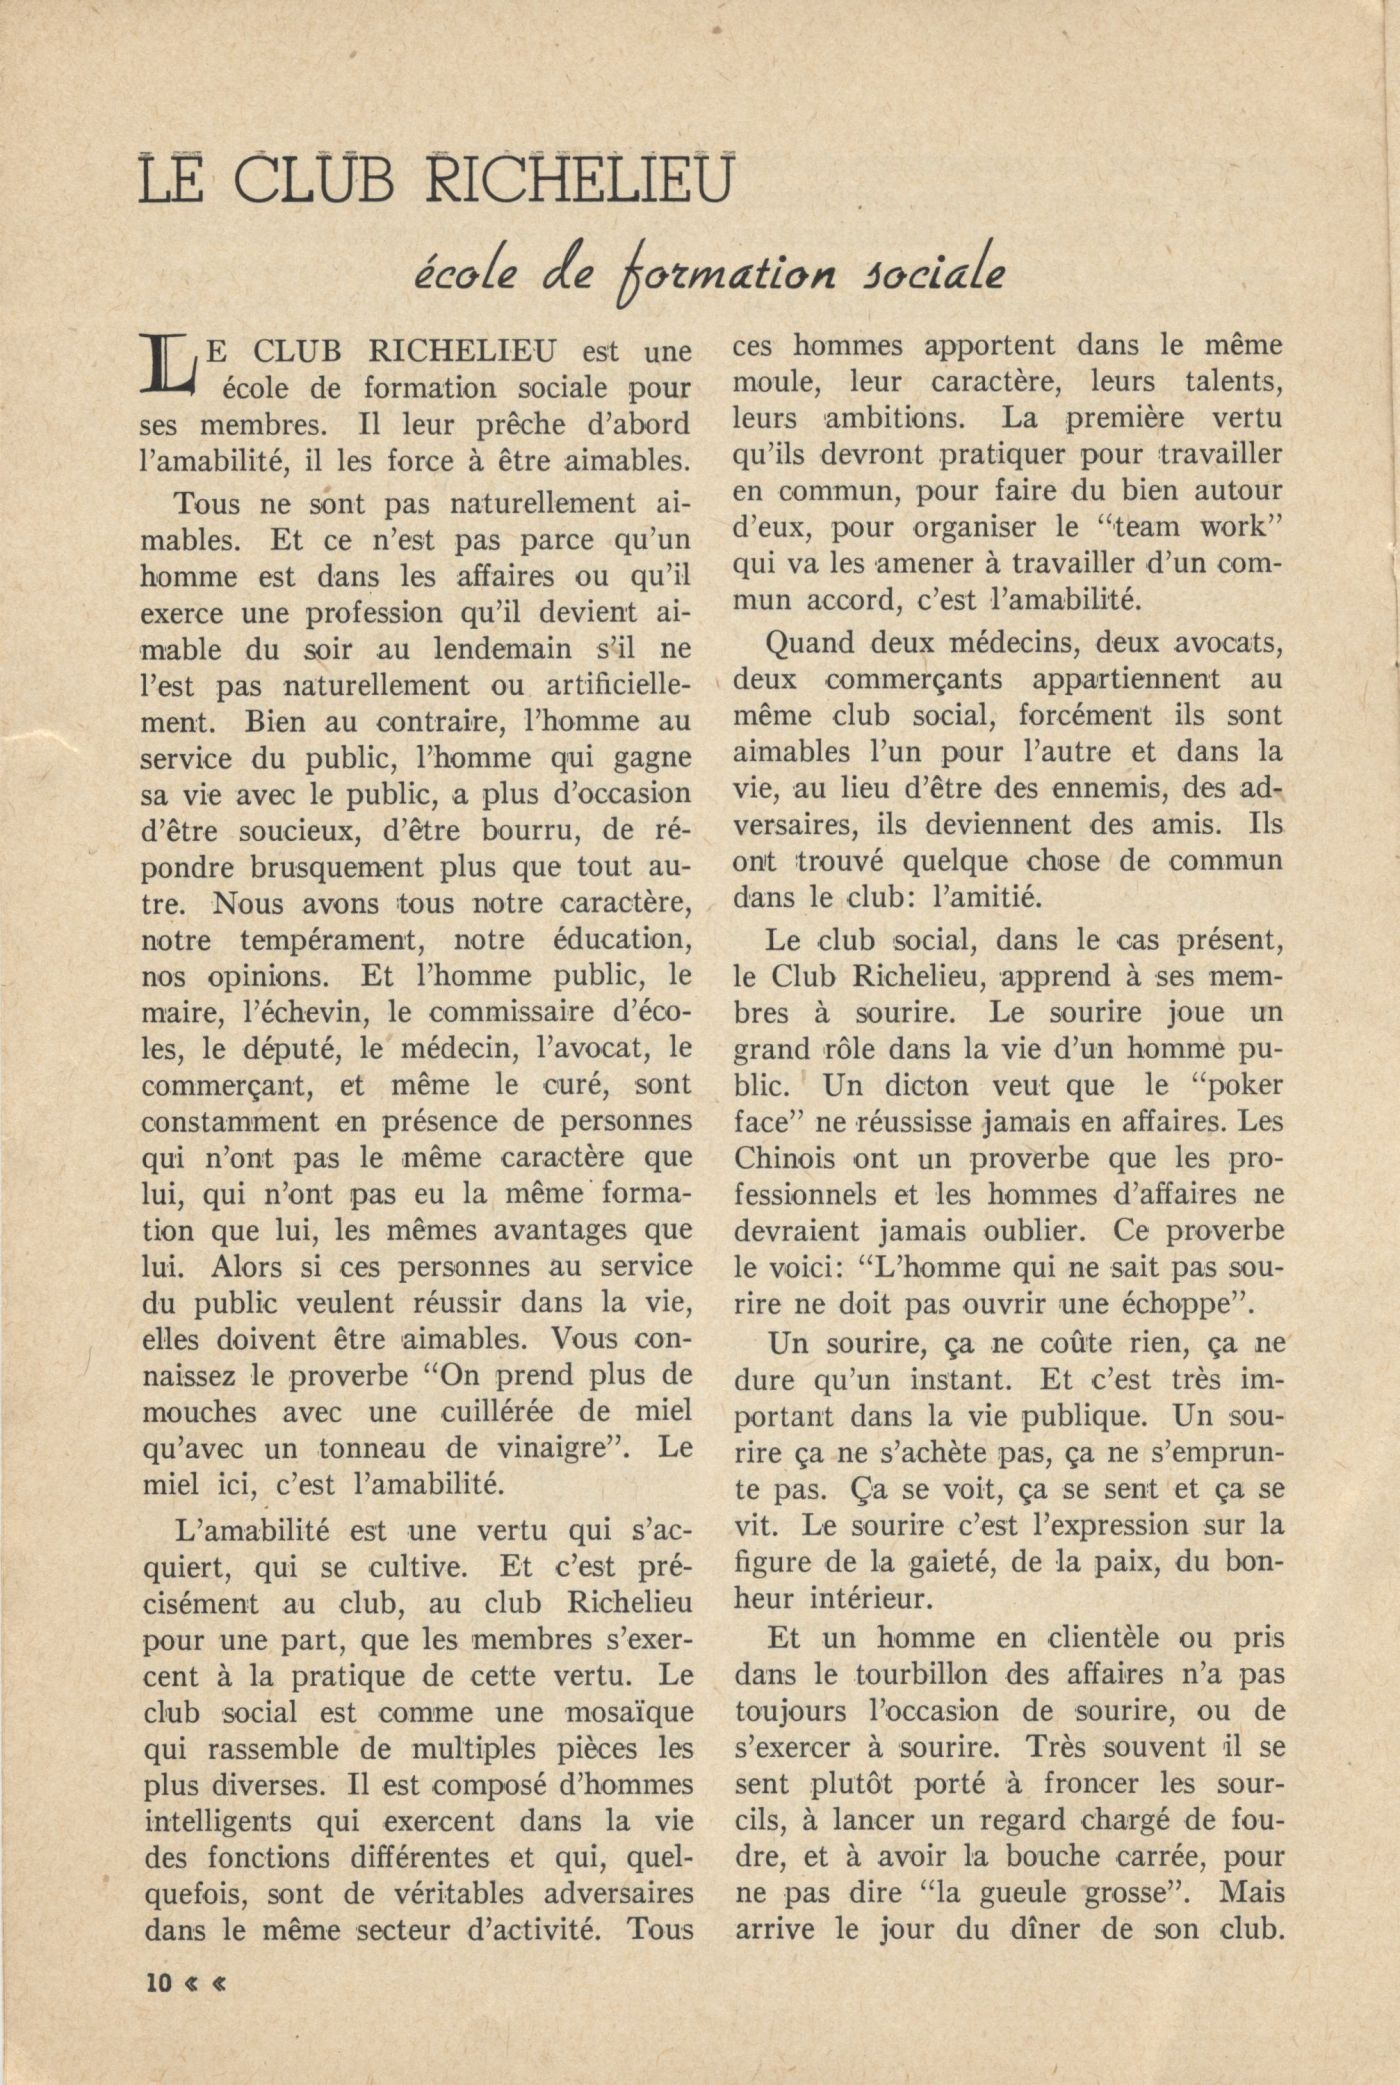 Bulletin printed in French. The title, place of publication, a logo and other details, appear on the cover page, followed by a table of contents. The text on page 10 is printed in two columns; it continues on the following page and is signed. Page 11 offers short texts regarding different communities.